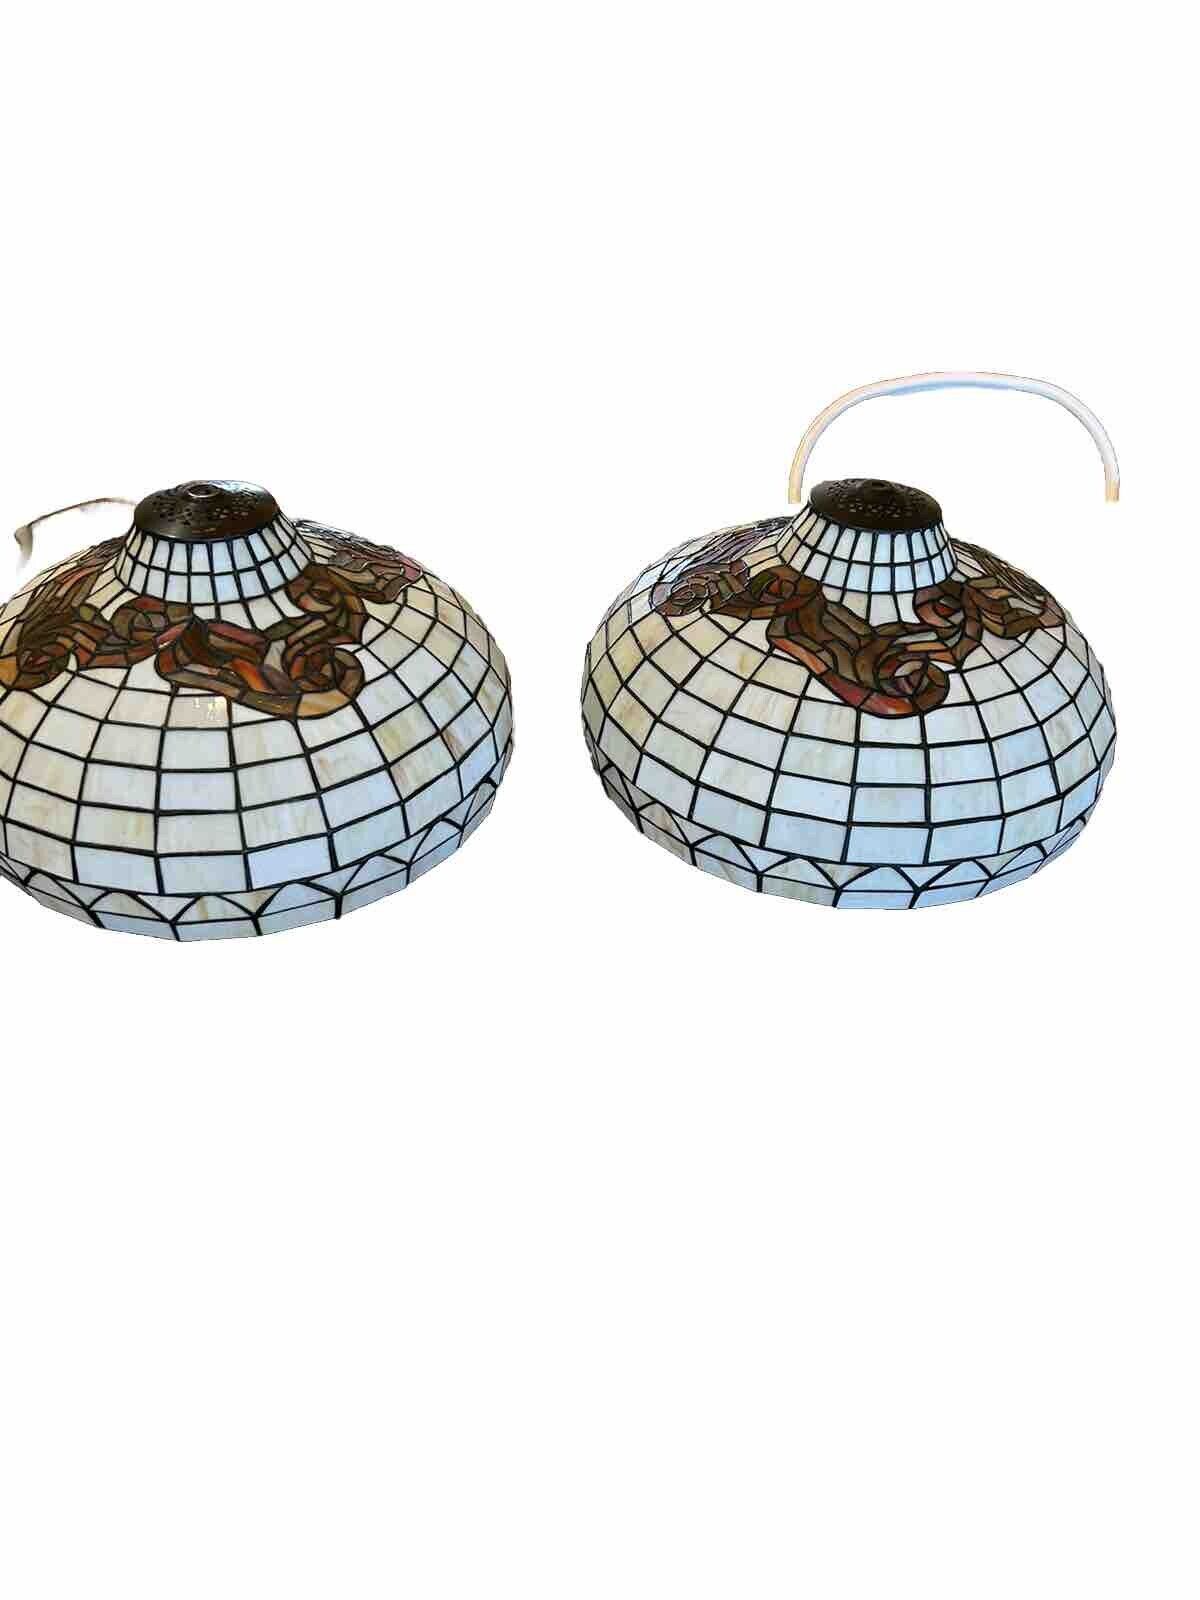 Tiffany Style Lampshades Pair. Never Used. 16 1/2 Width 10 1/2 Inches tall.